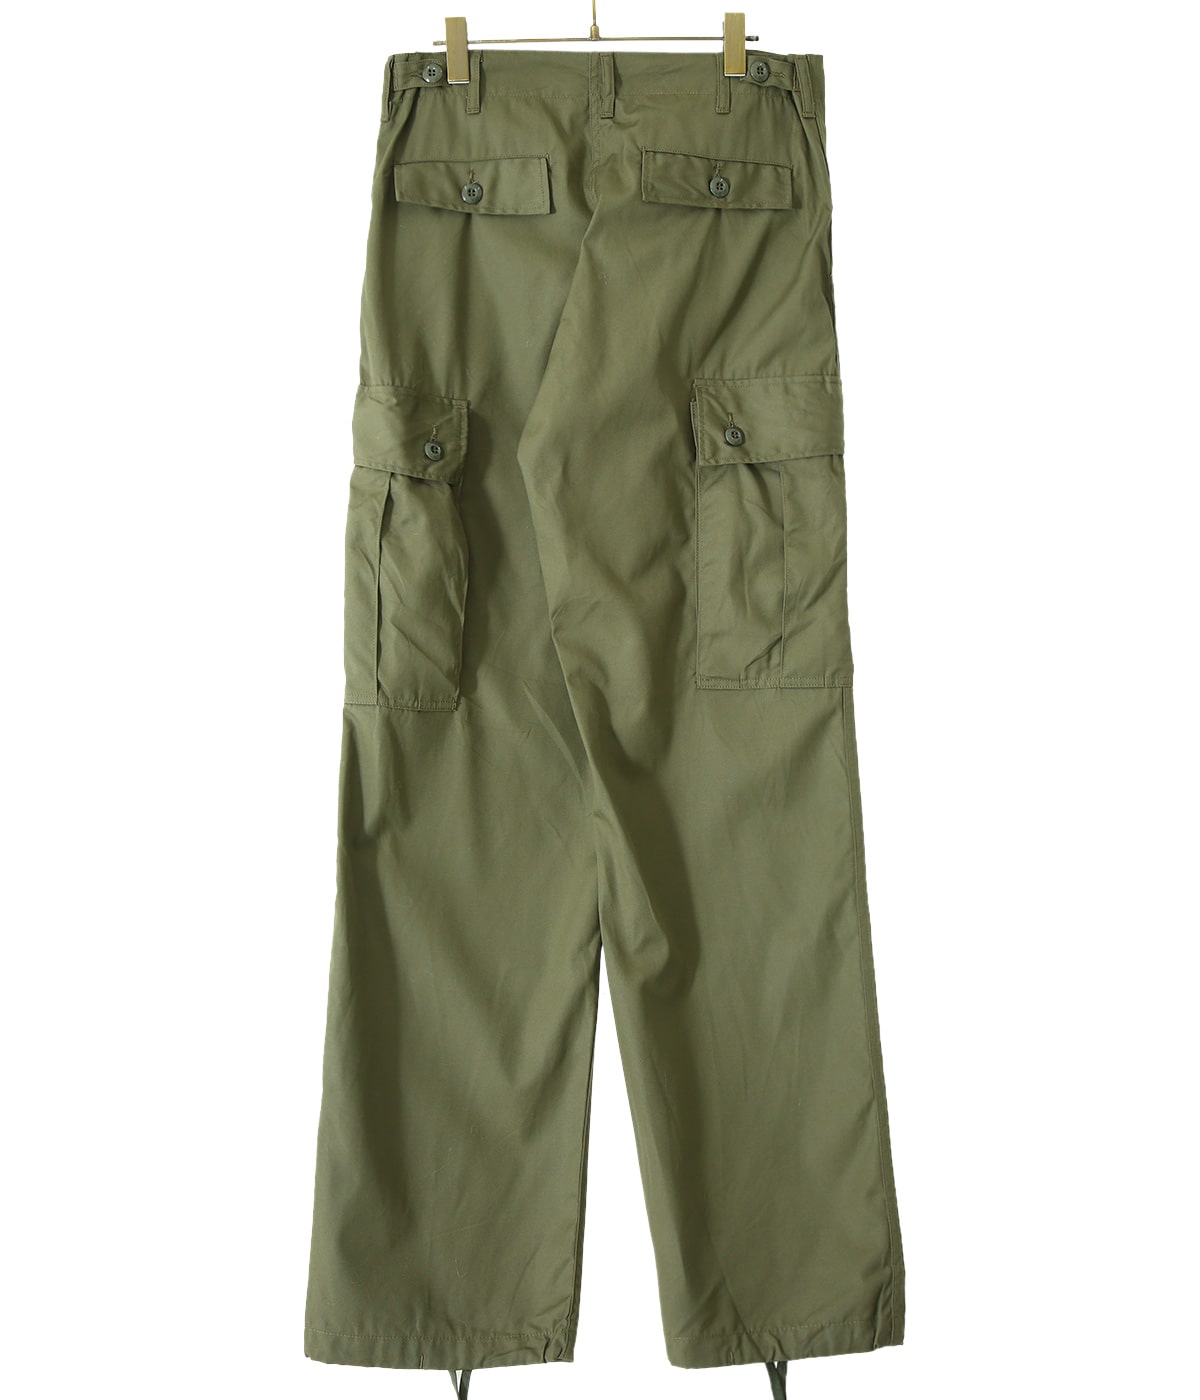 TROUSERS MEN'S COTTON WIND RESISTANT POPLIN OLIVE GREEN ARMY SHADE 107